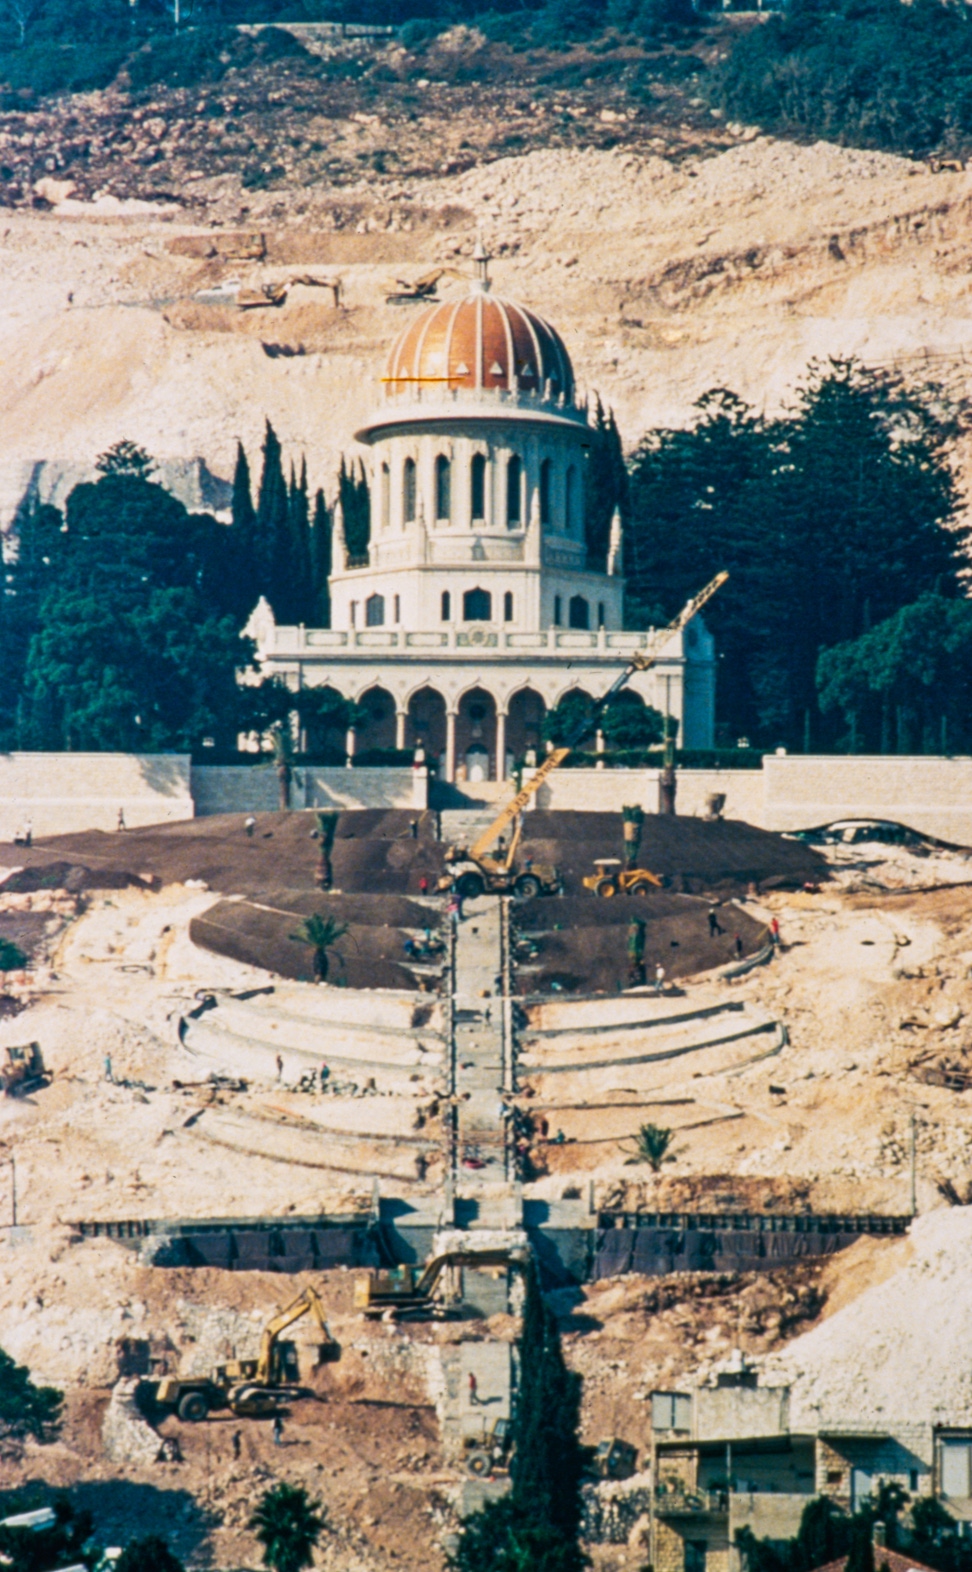 Construction of the Terraces of the Shrine of the Báb 1991